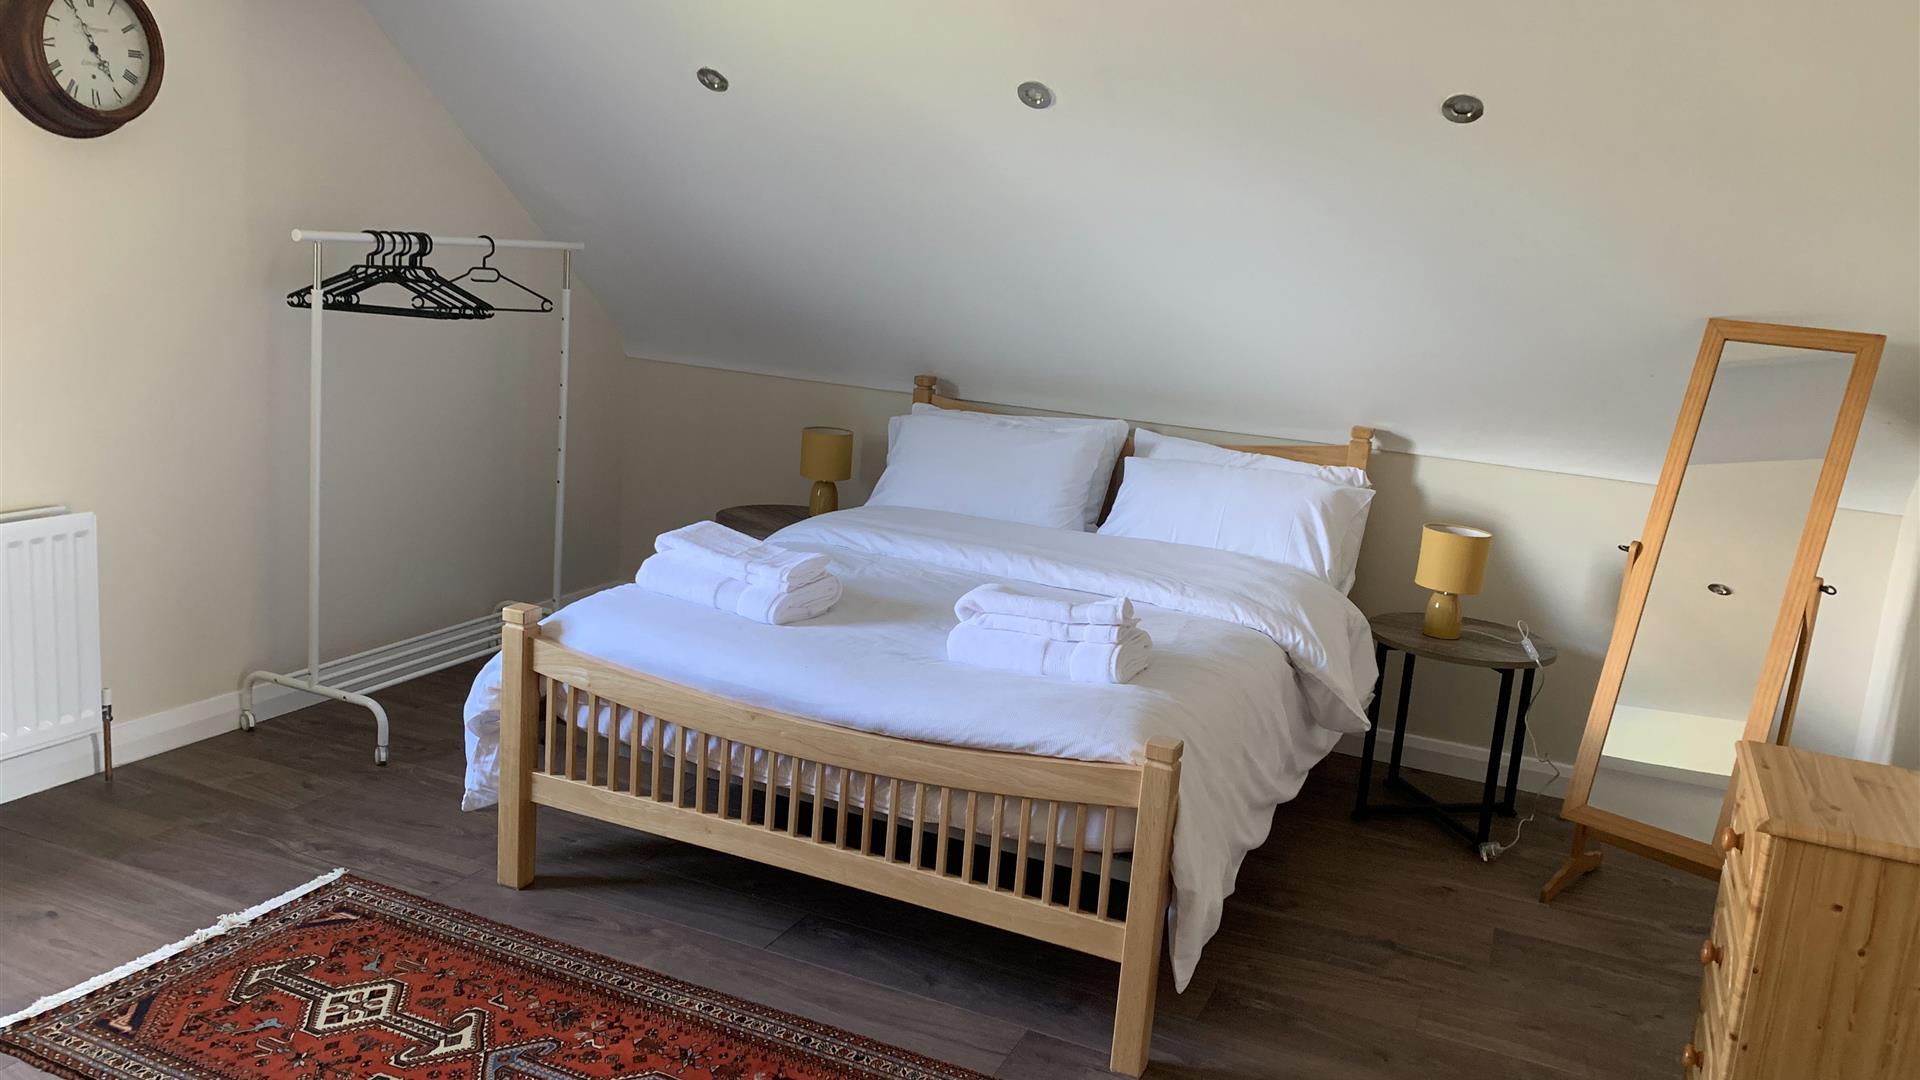 Image shows bedroom in loft with double bed, dressing mirror and clothes rail